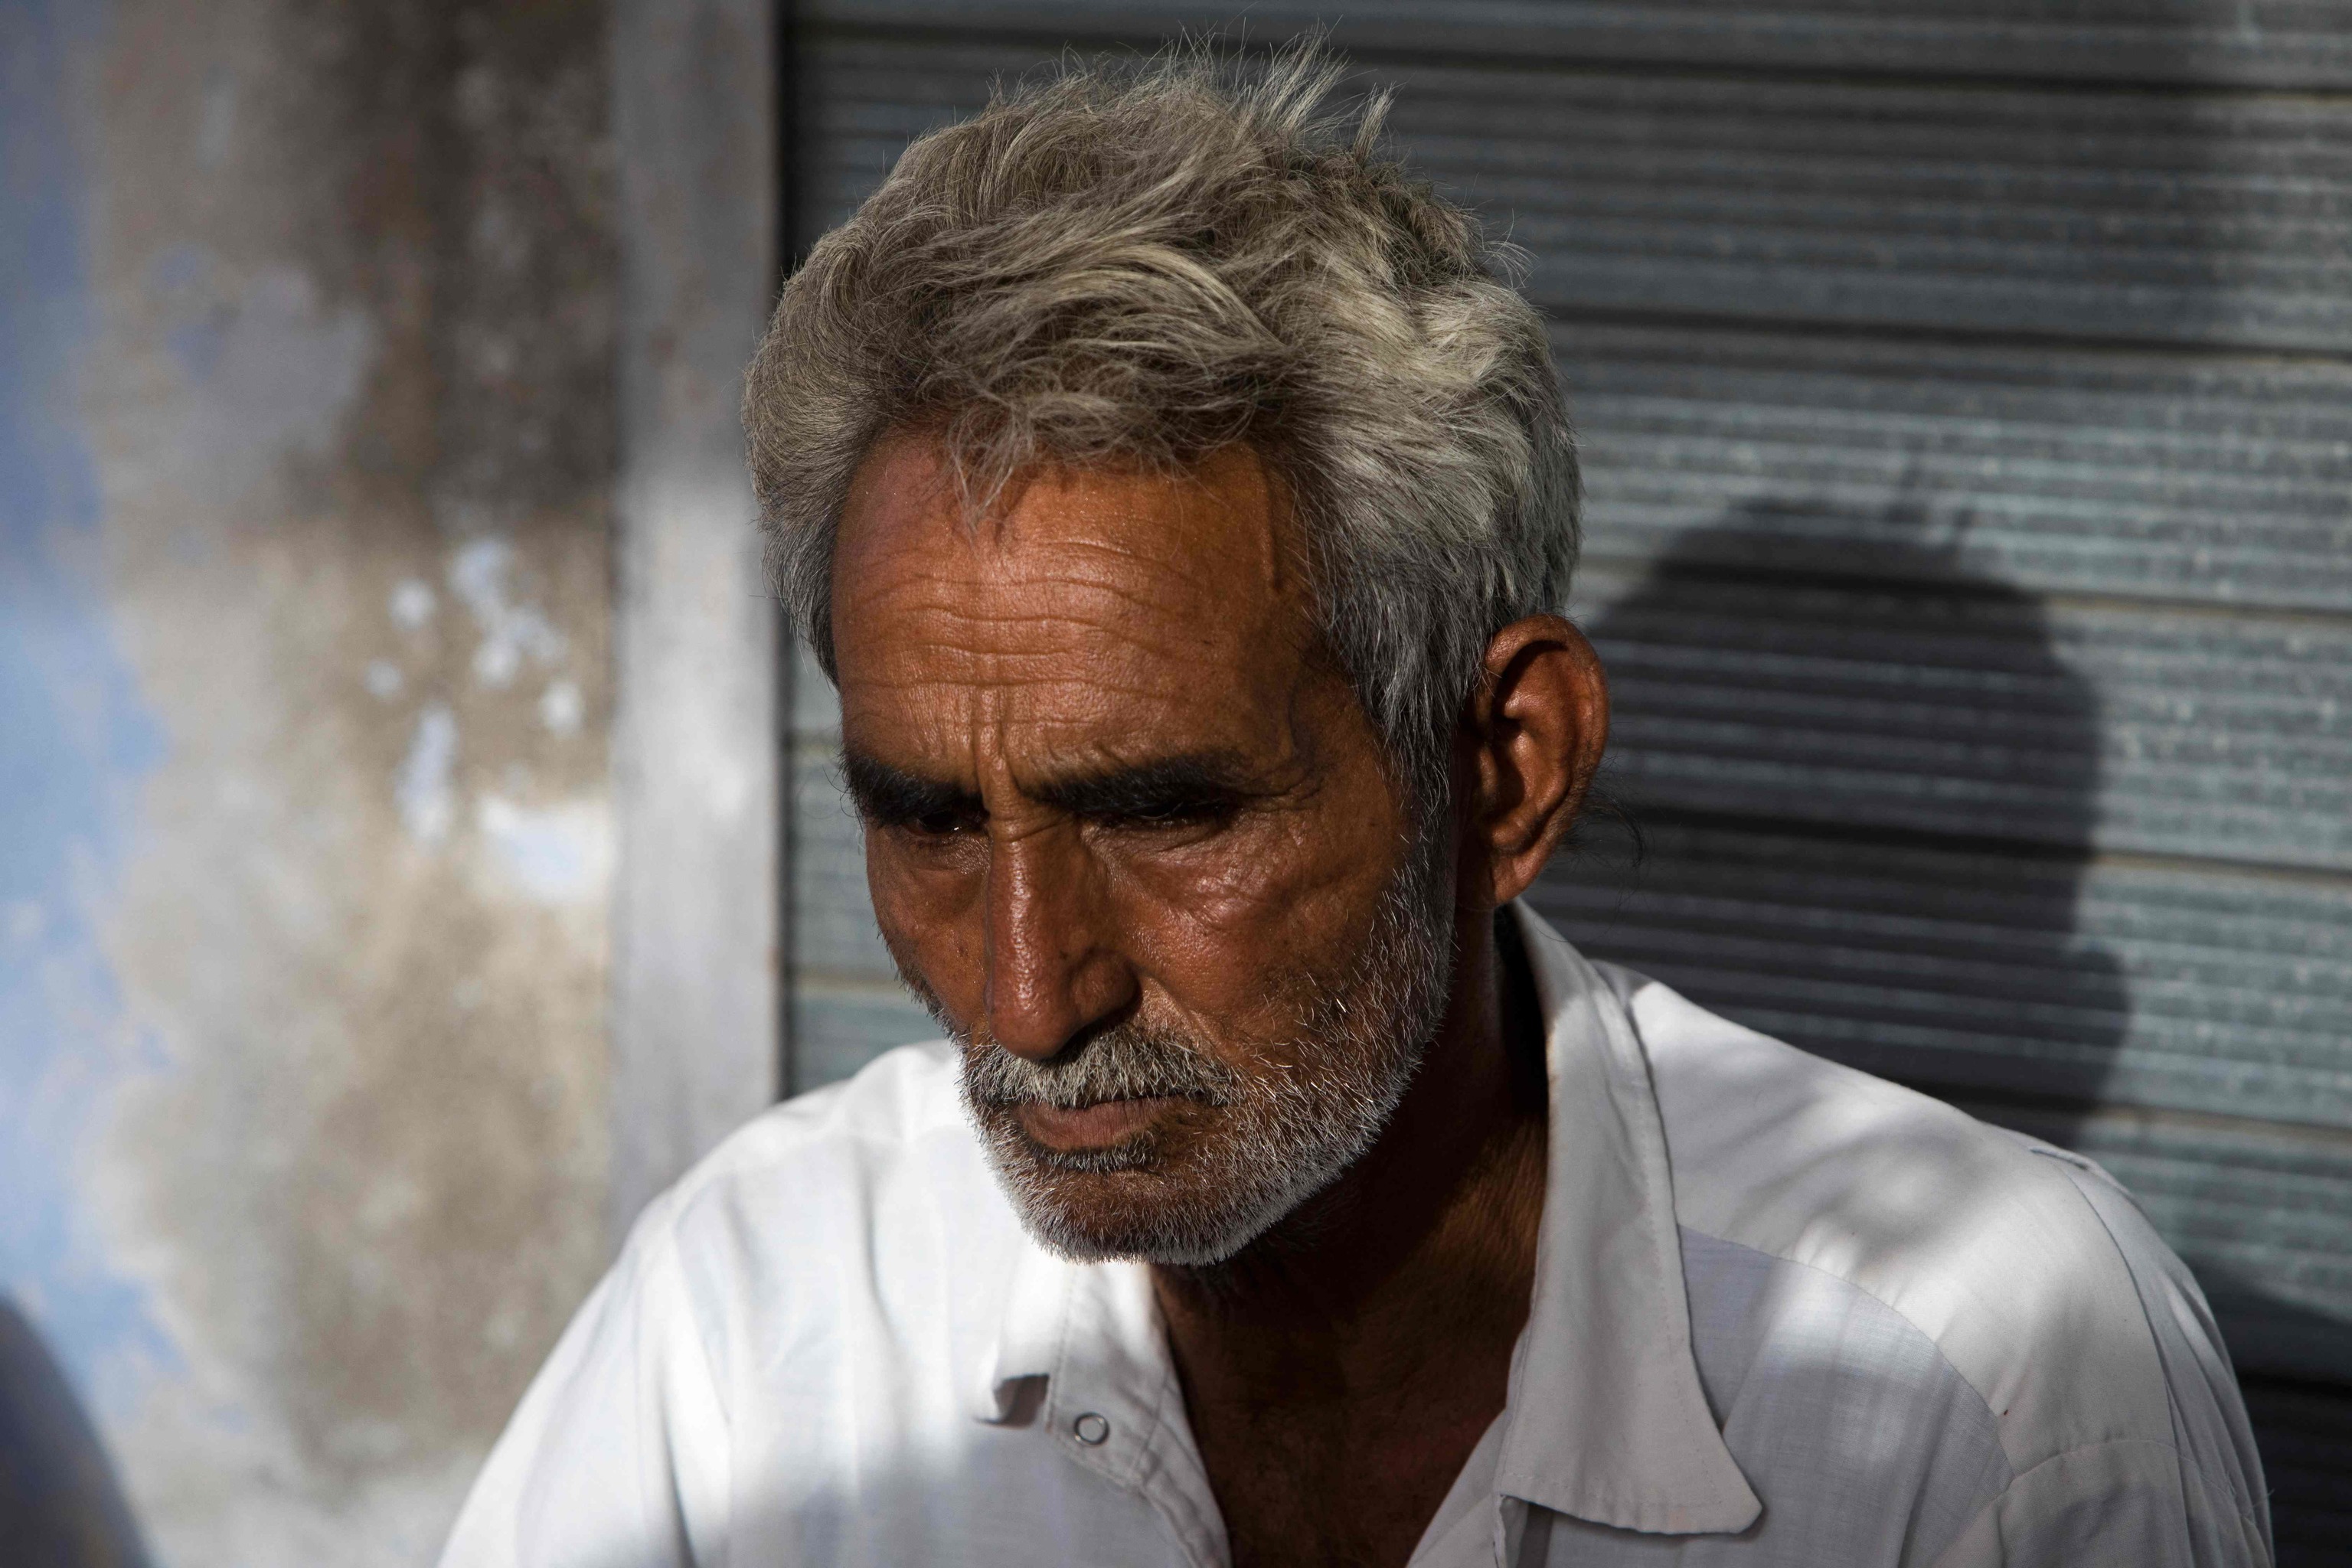 Farmer Sardar Meena mourns his three married daughters and two grandchildren, who were found dead in a well in Dudu village, the family's home in Chhapya village, Rajasthan state, India, on May 28.